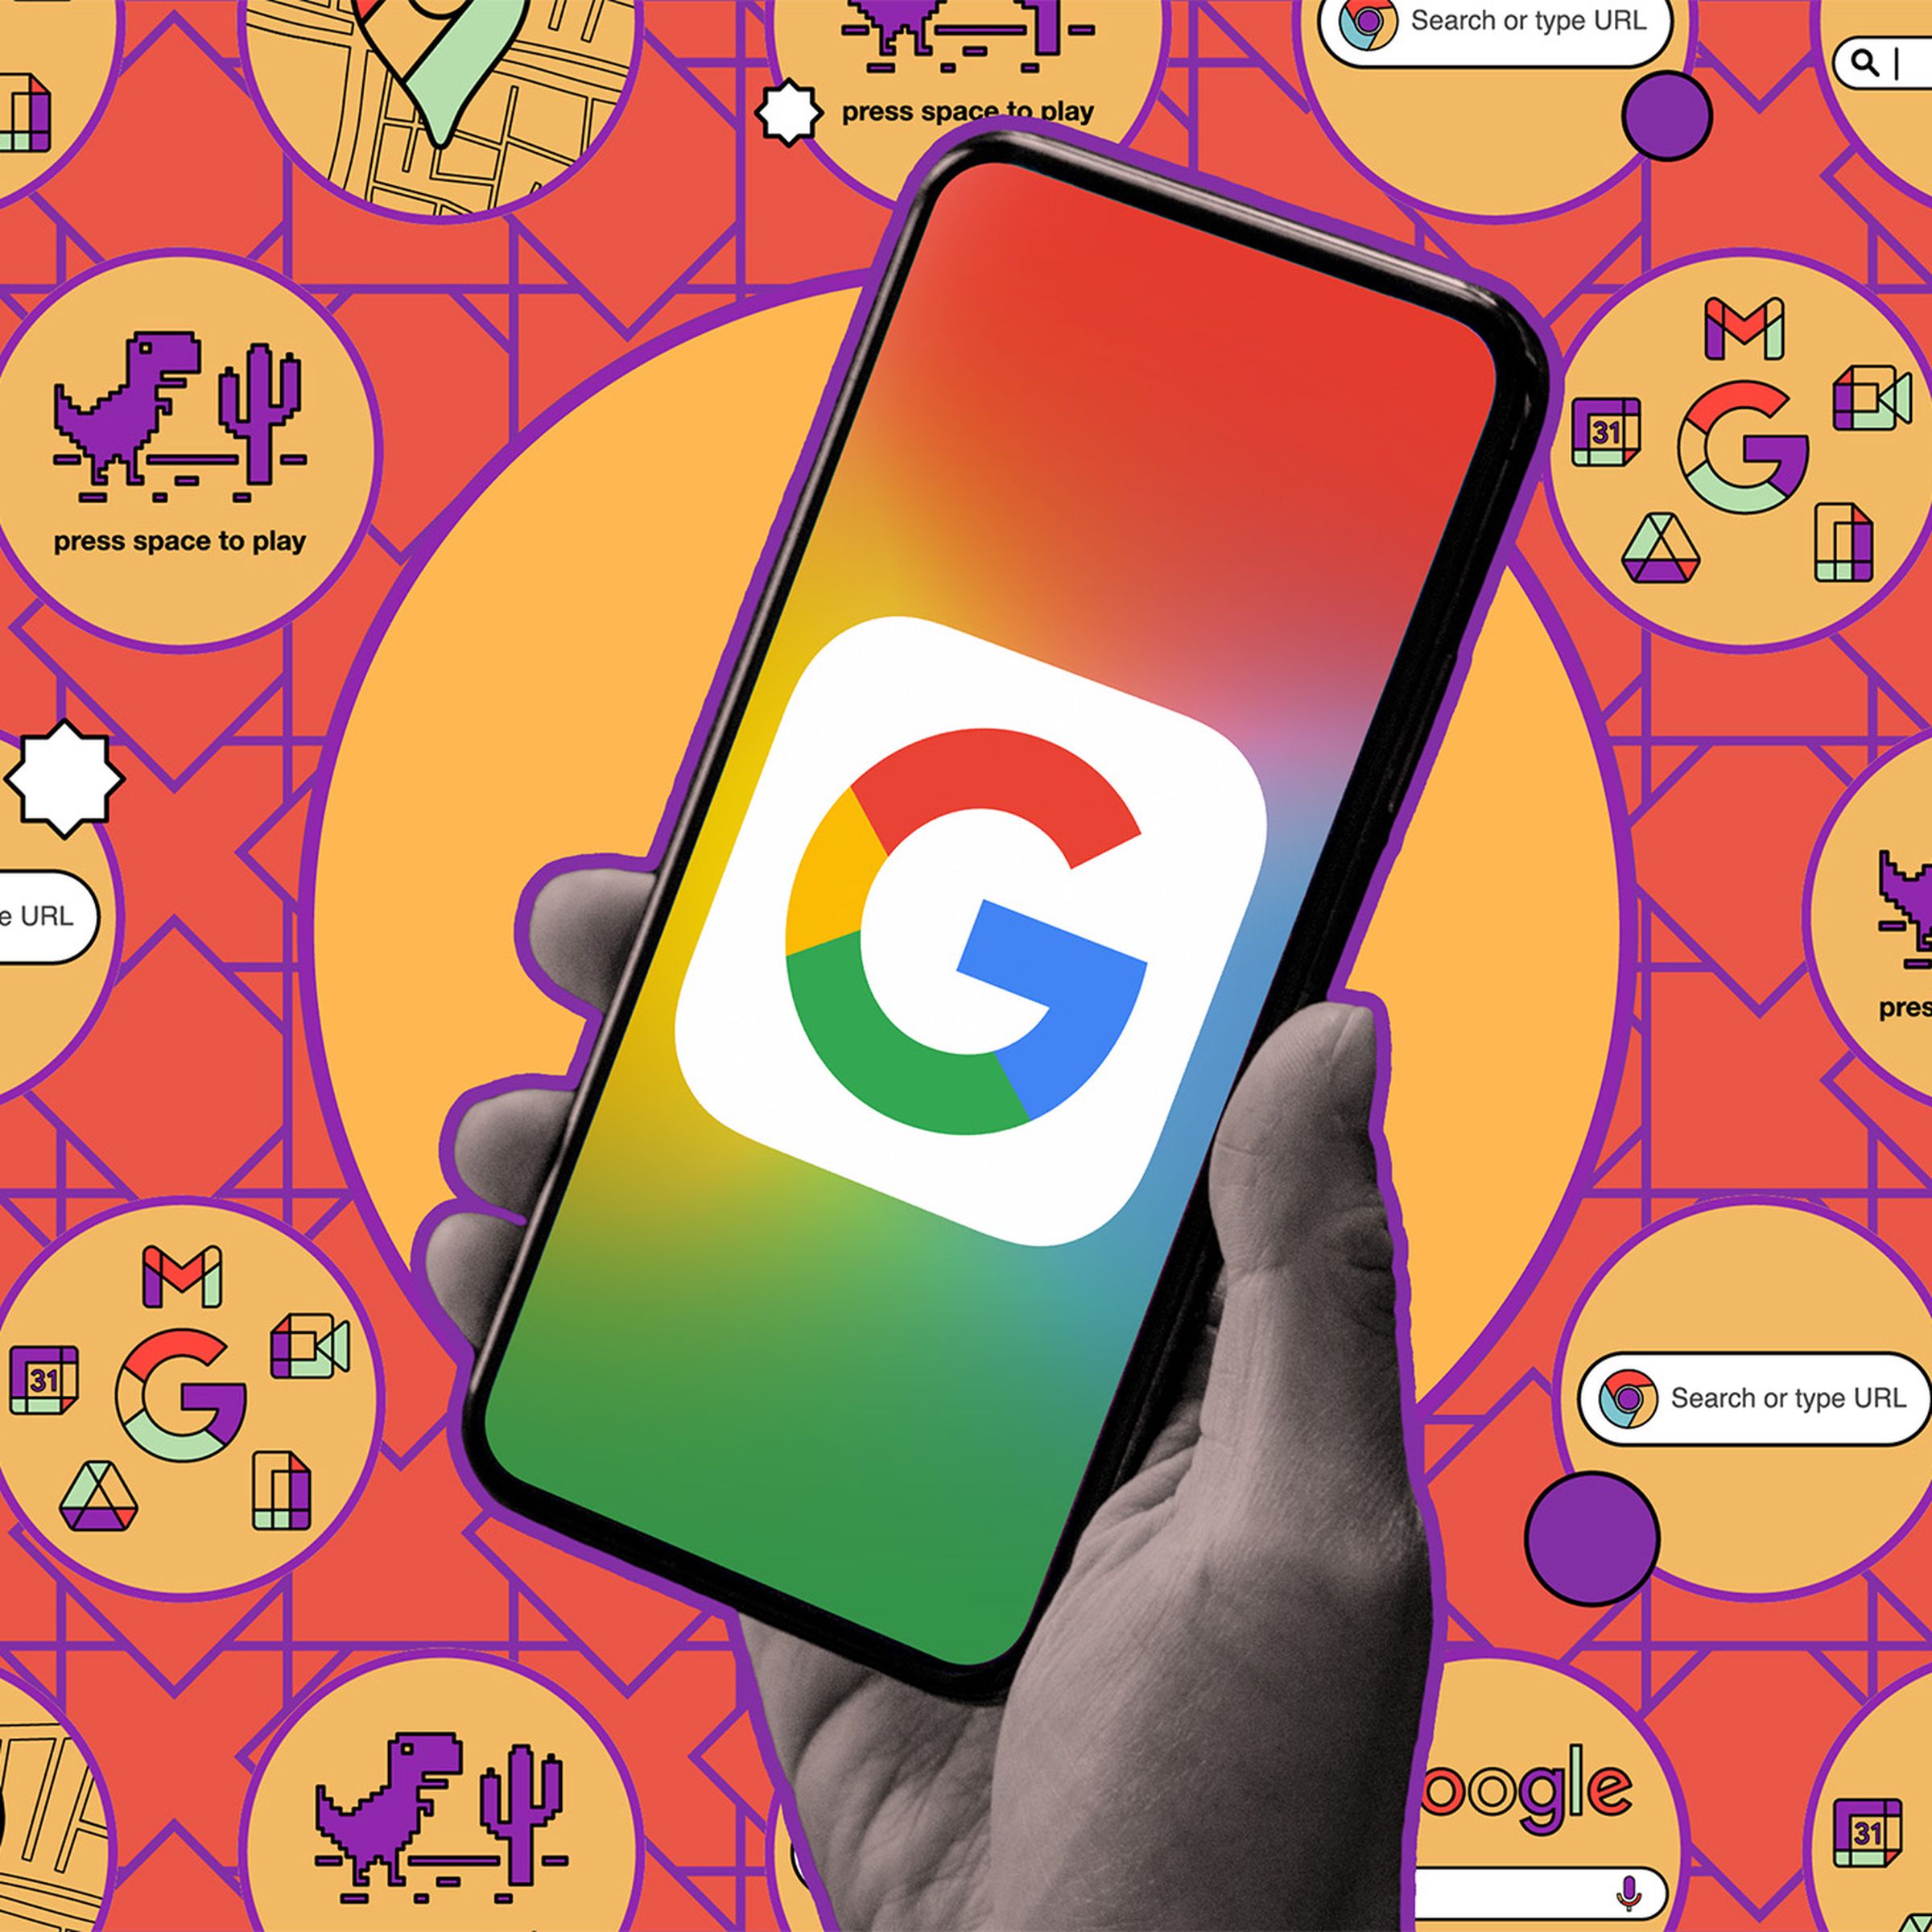 Hand holding phone with Google “G” symbol against an illustrated background.